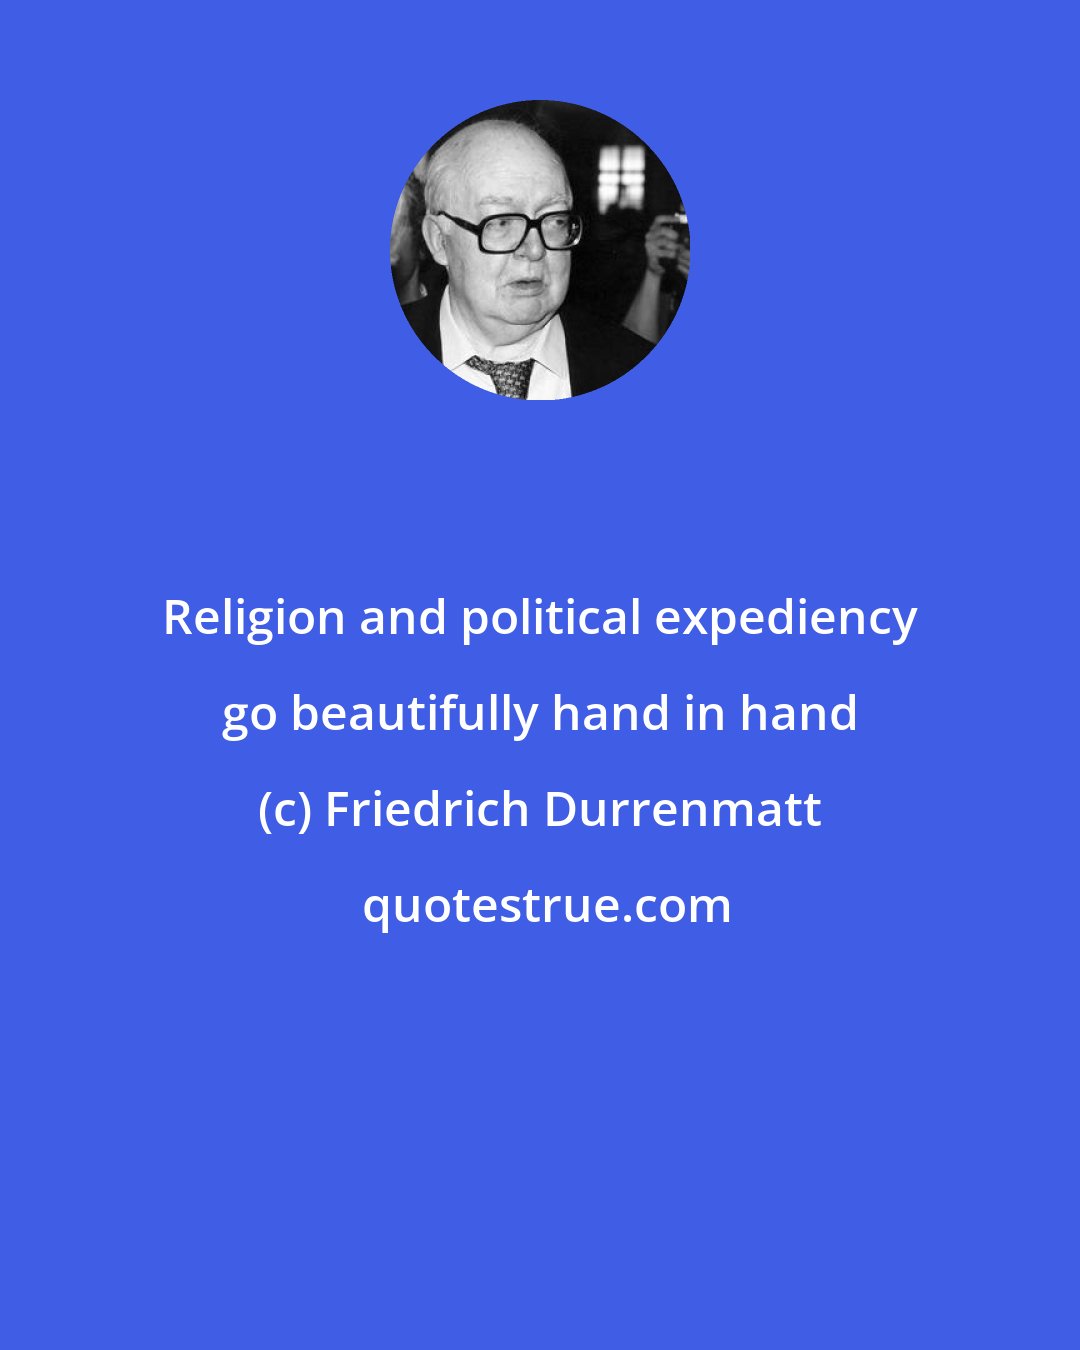 Friedrich Durrenmatt: Religion and political expediency go beautifully hand in hand